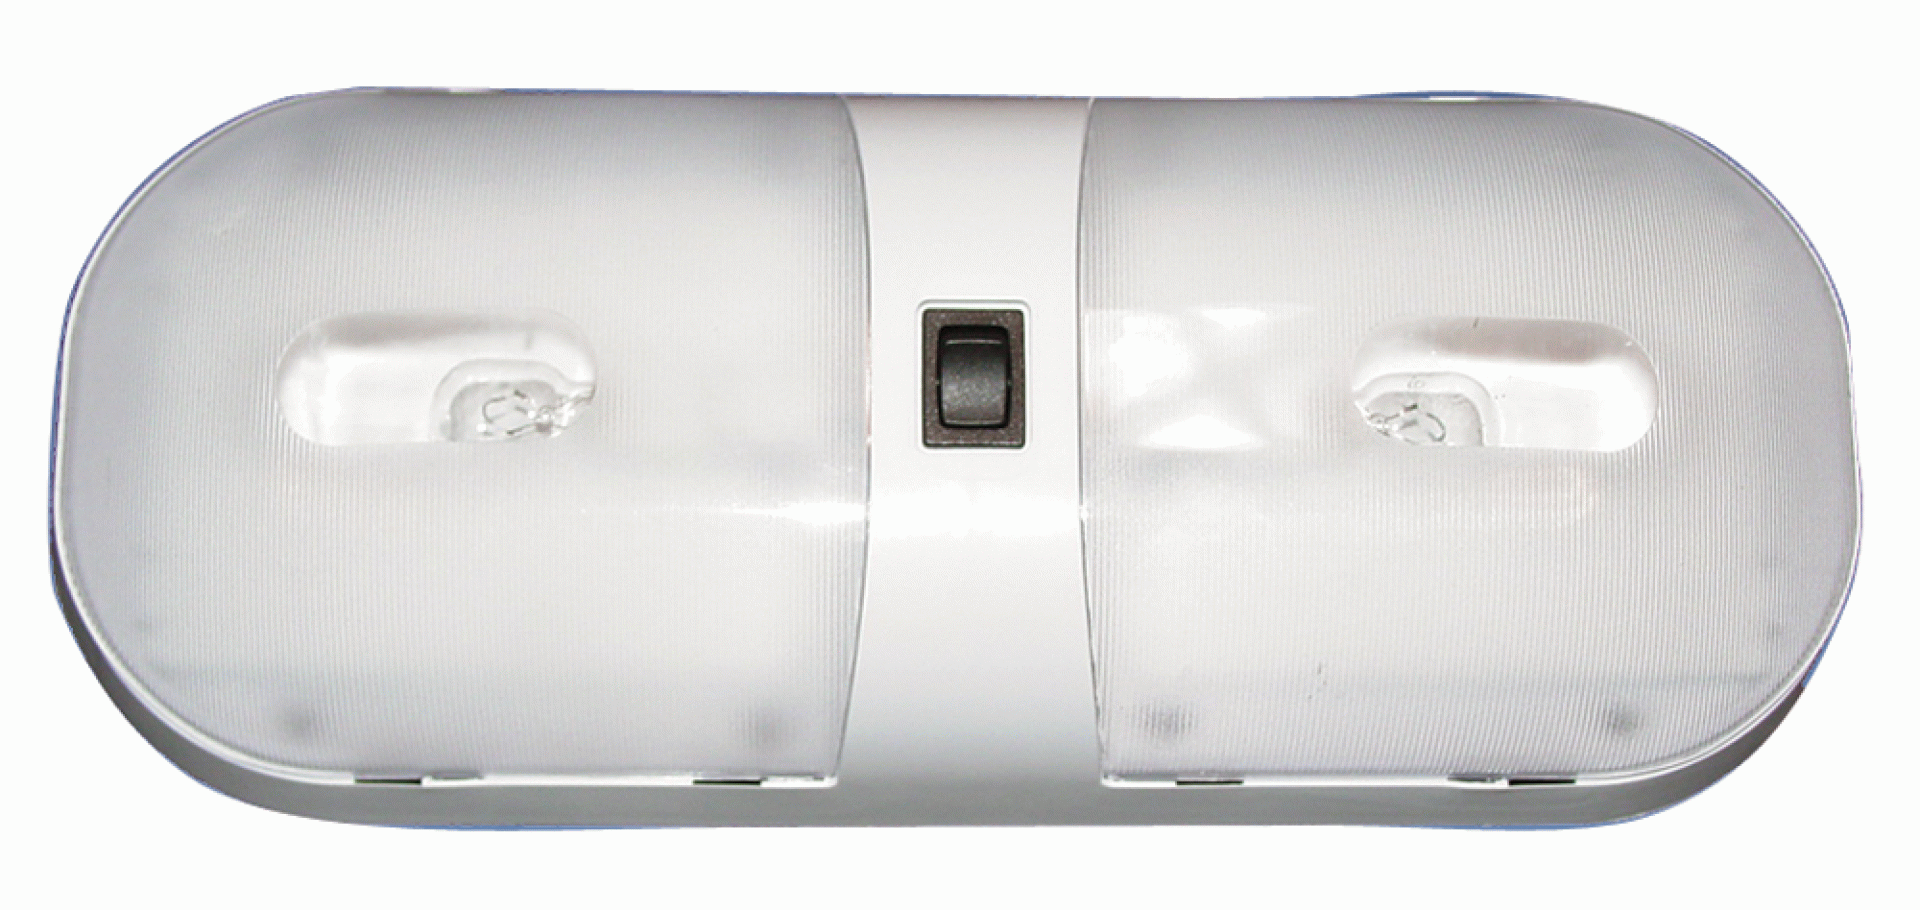 FASTENERS UNLIMITED | CMD-001-902XPB | DOME LIGHT DOUBLE 11-3/8" X 5-4/5" X 1-7/8" ROCKER SWITCH